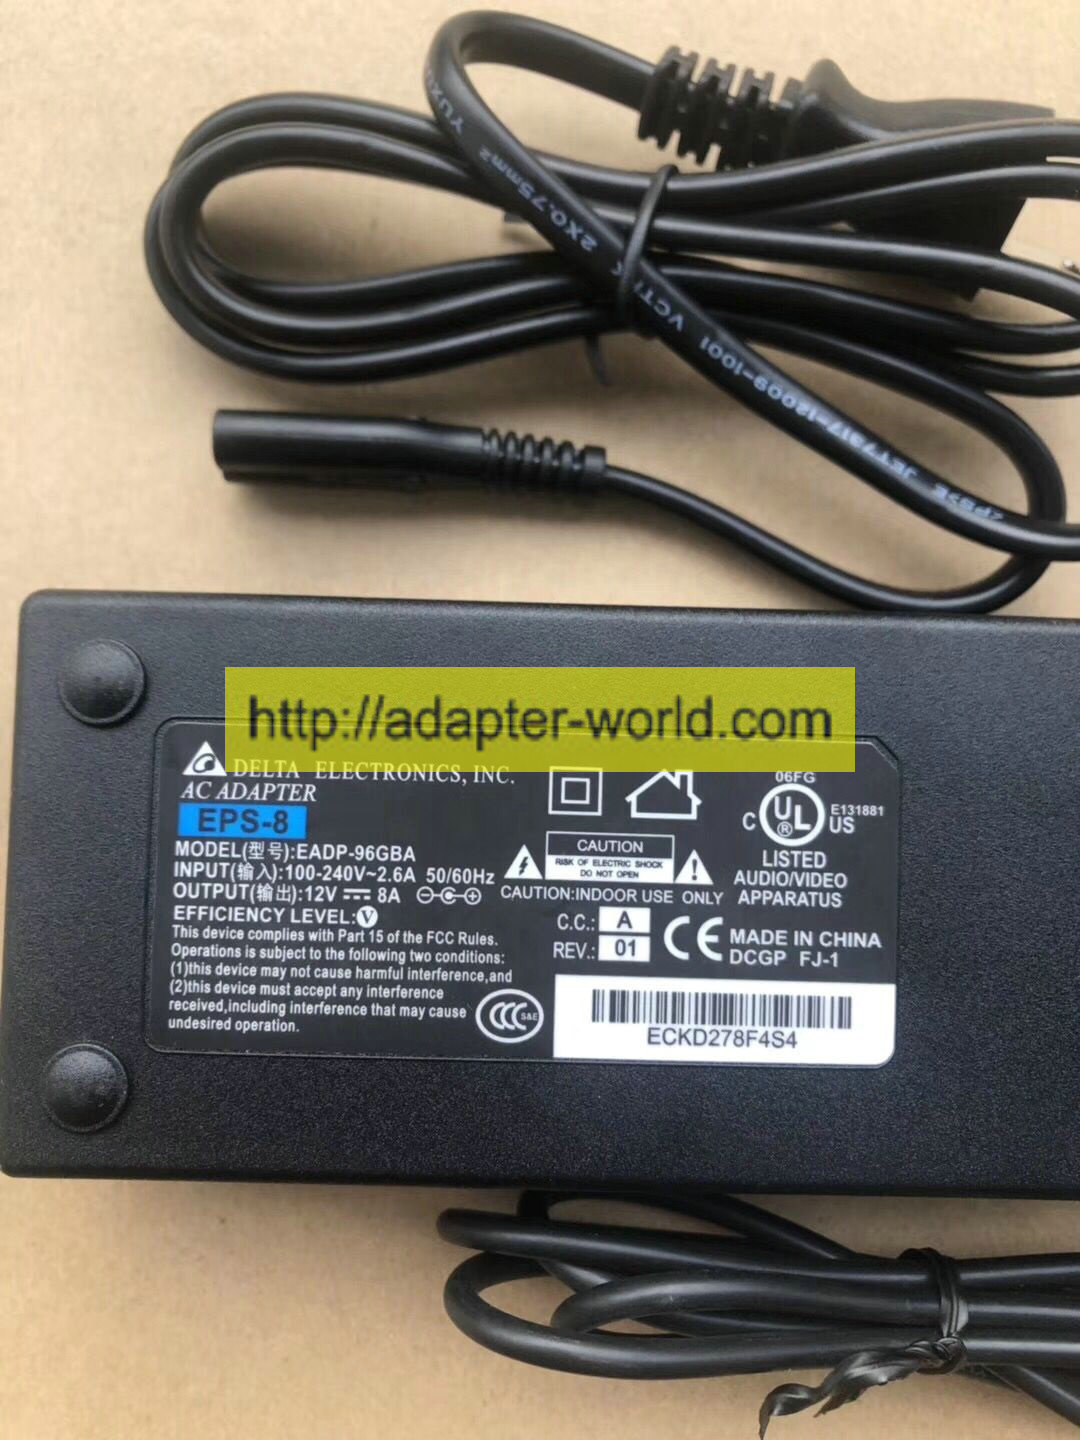 *100% Brand NEW* DELTA EADP-96GBA 12V DC 8A Switching AC ADAPTOR Power Adapter